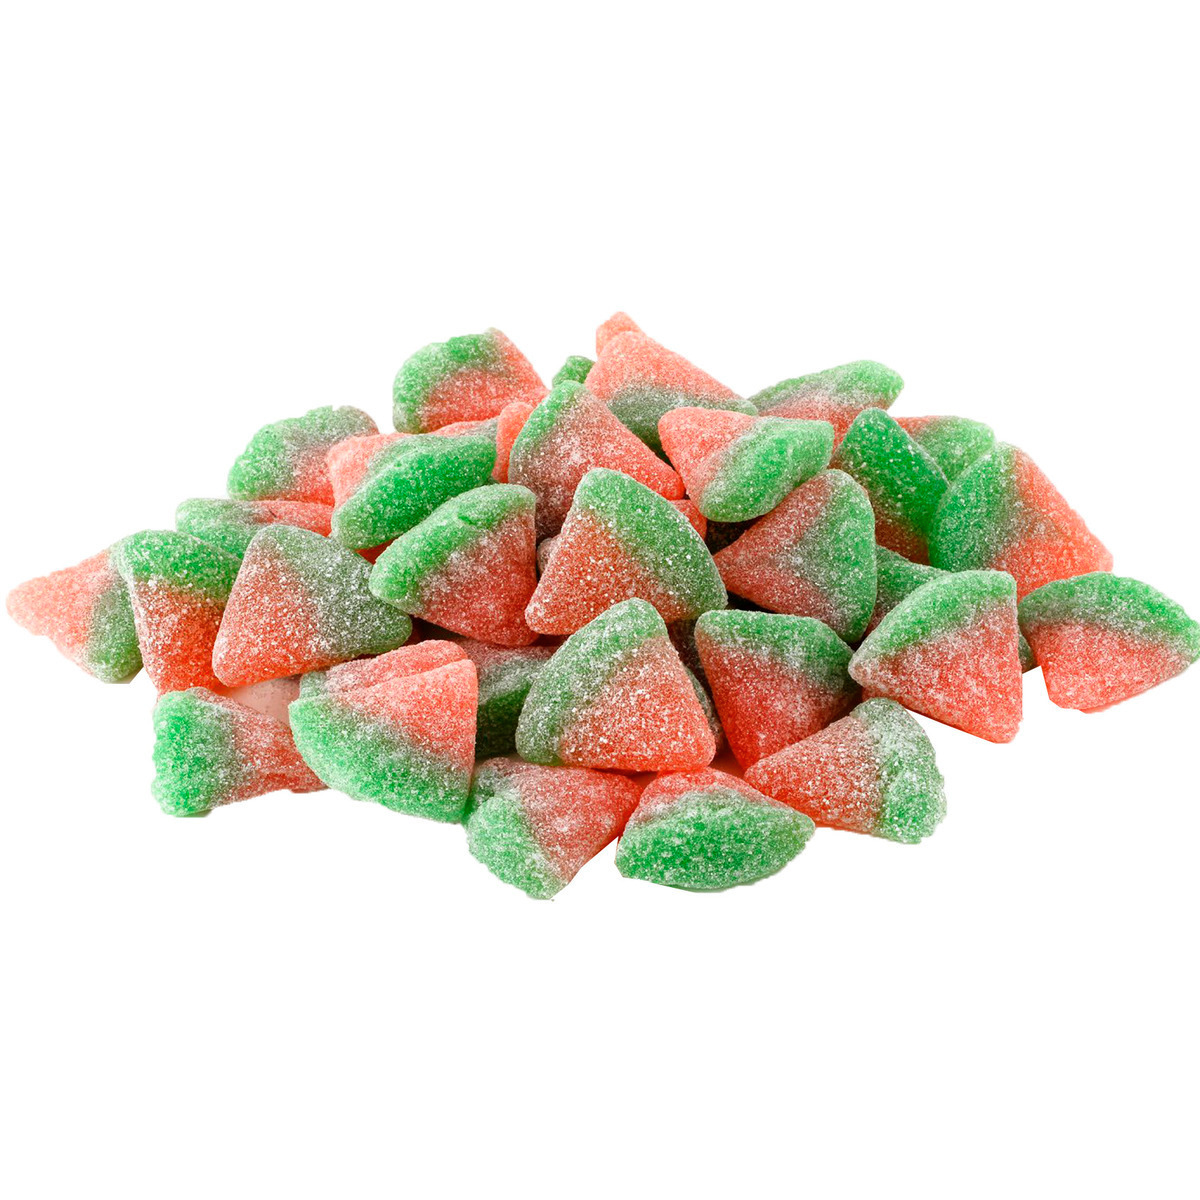 SOUR PATCH KIDS Watermelon Soft & Chewy Candy- BULK CANDY- TWO POUNDS